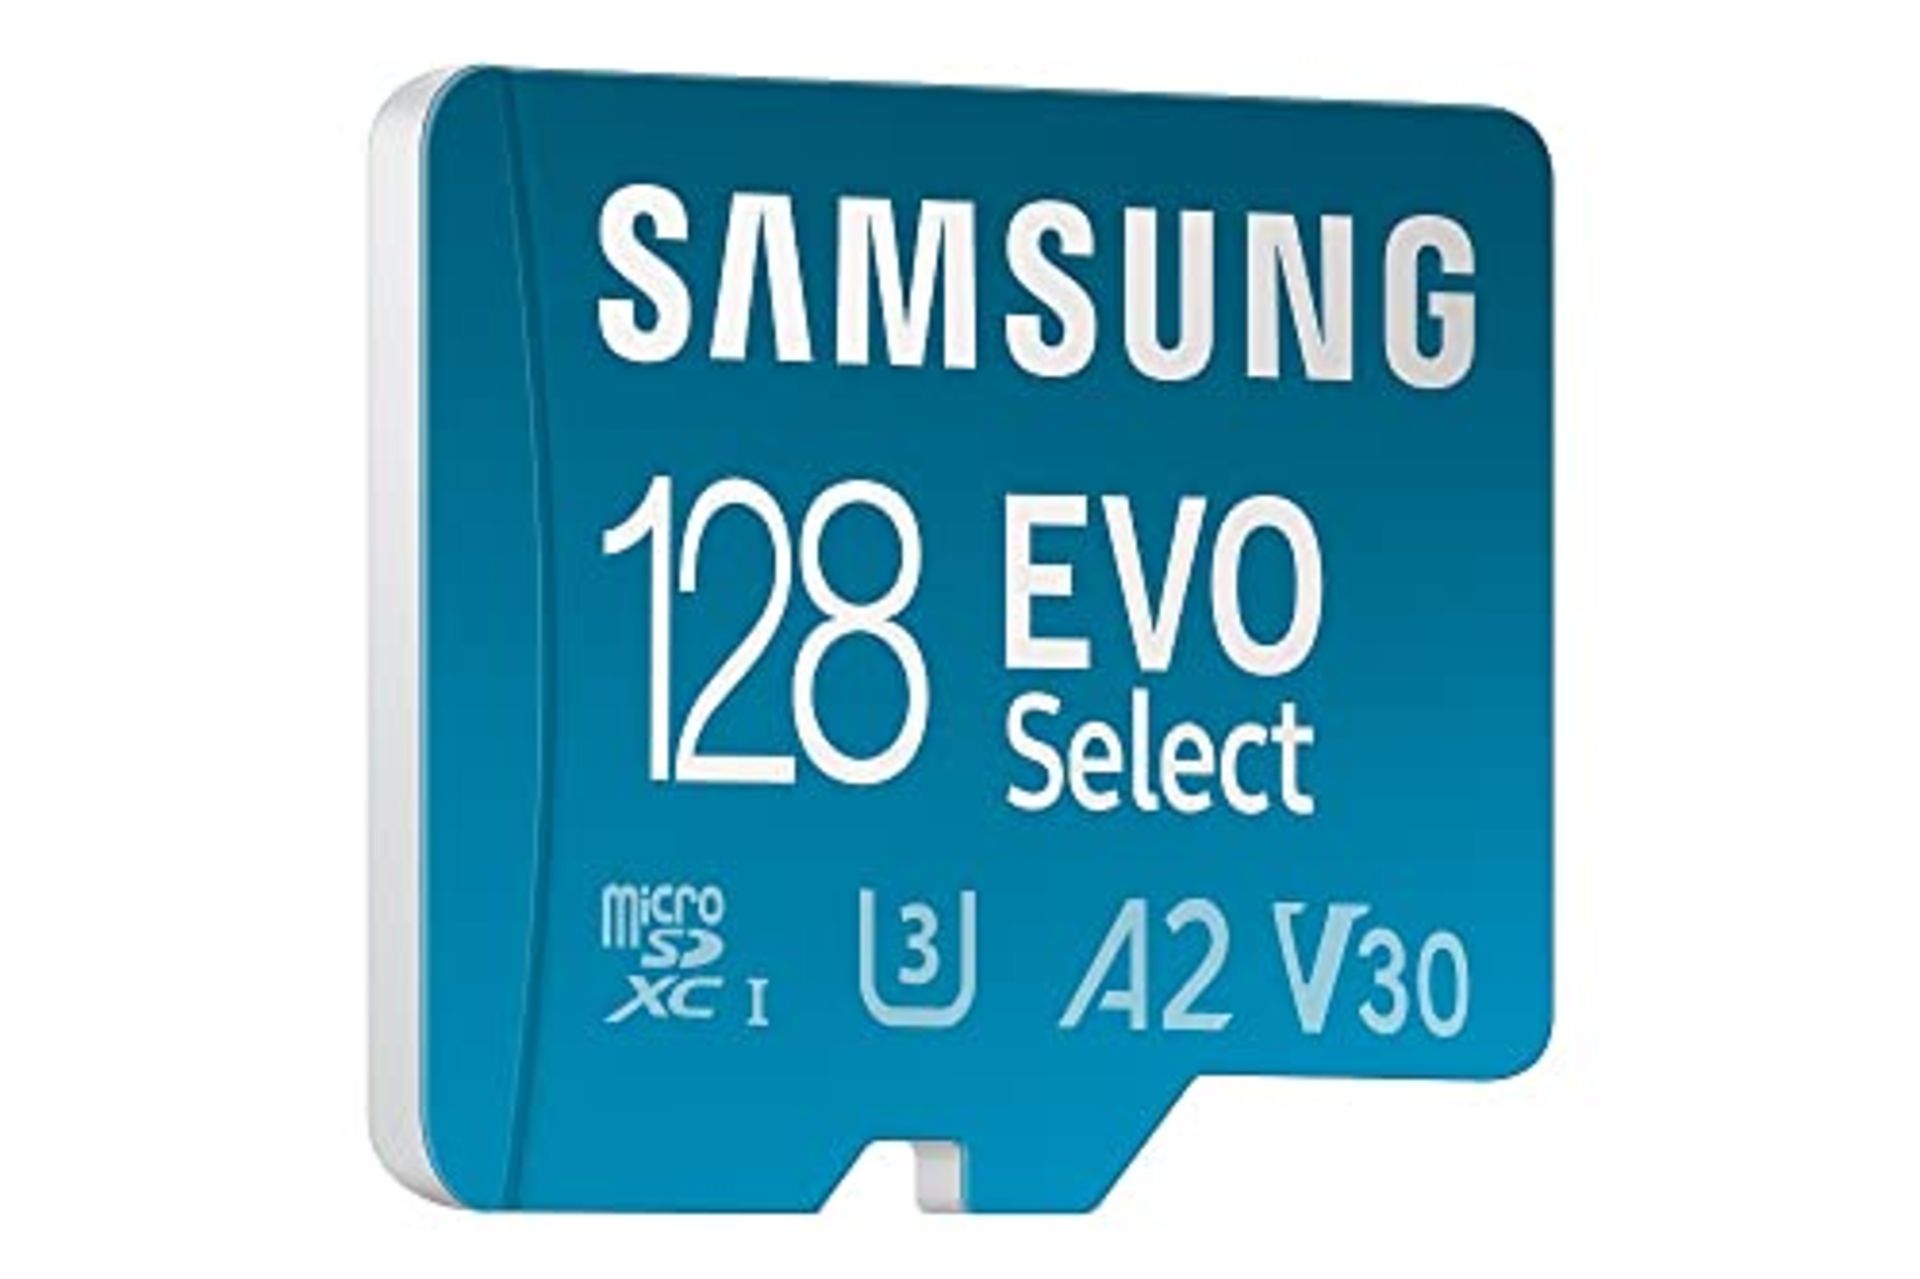 Samsung EVO Select microSD card + SD adapter, 128GB, memory card for smartphone and ta - Image 3 of 4